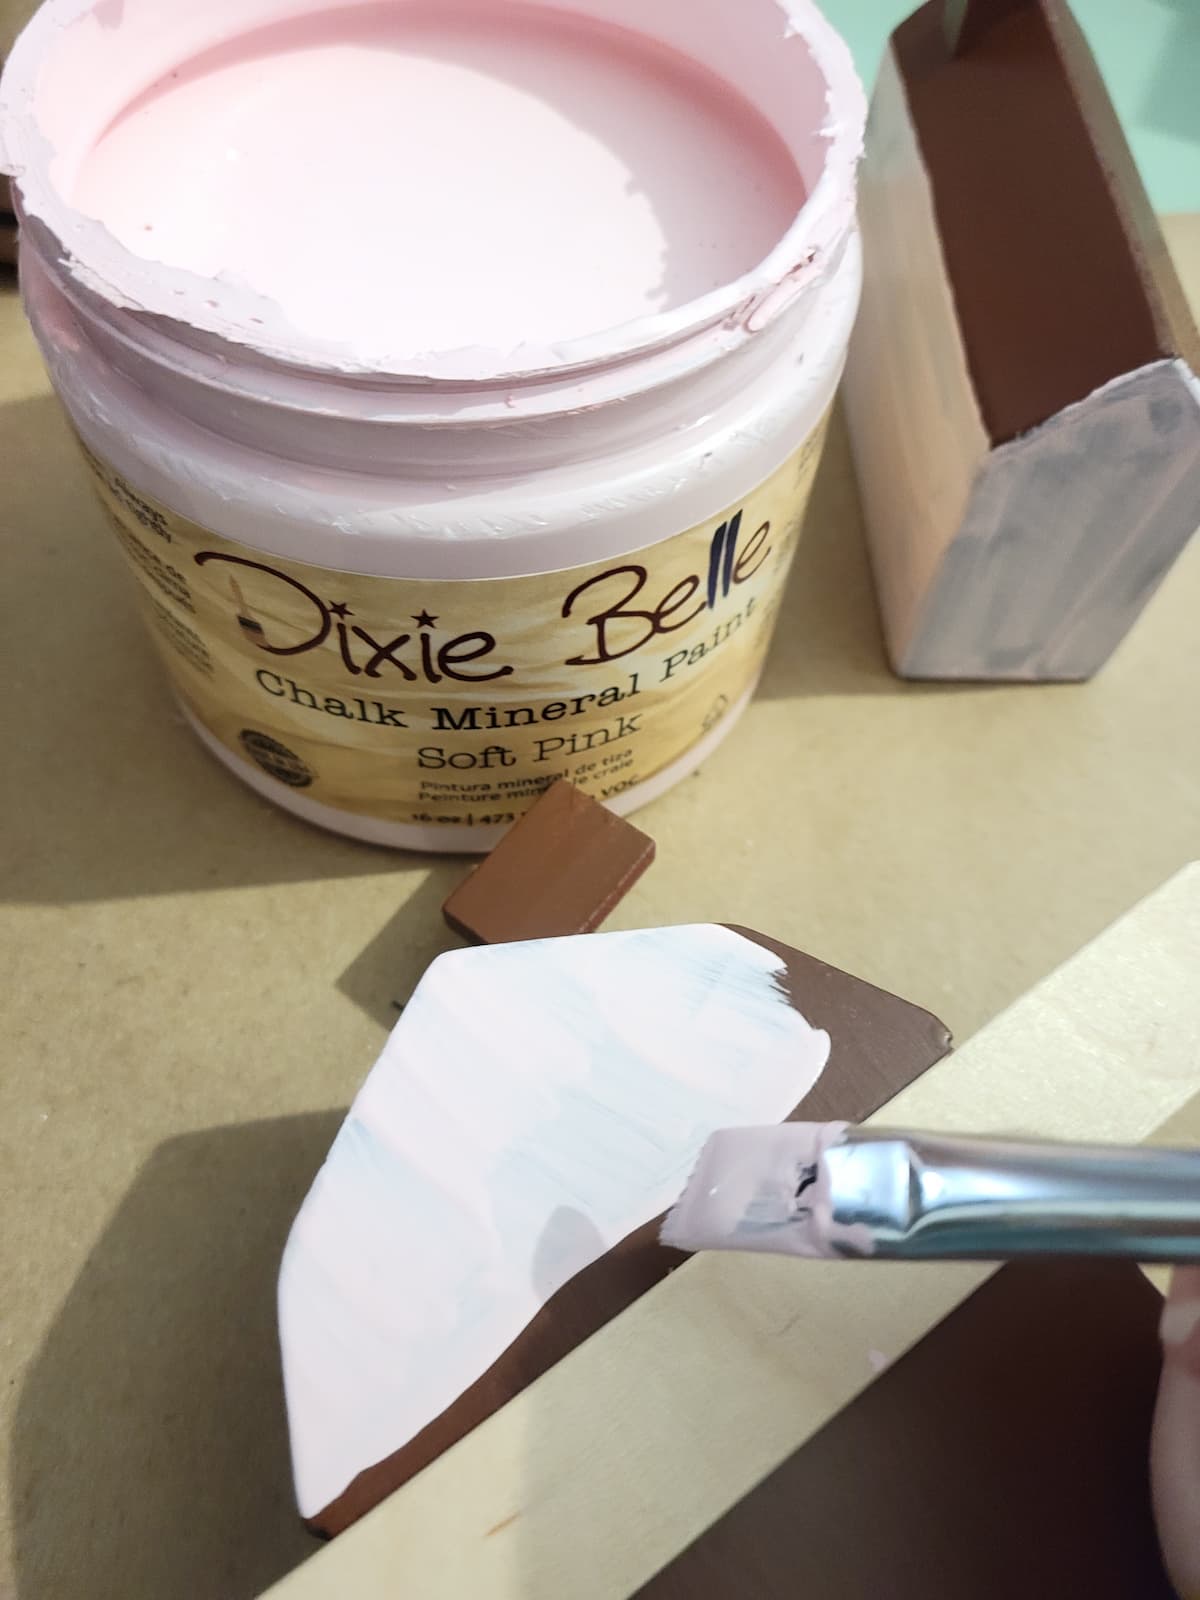 Dixie Belle Soft Pink For gingerbread houses